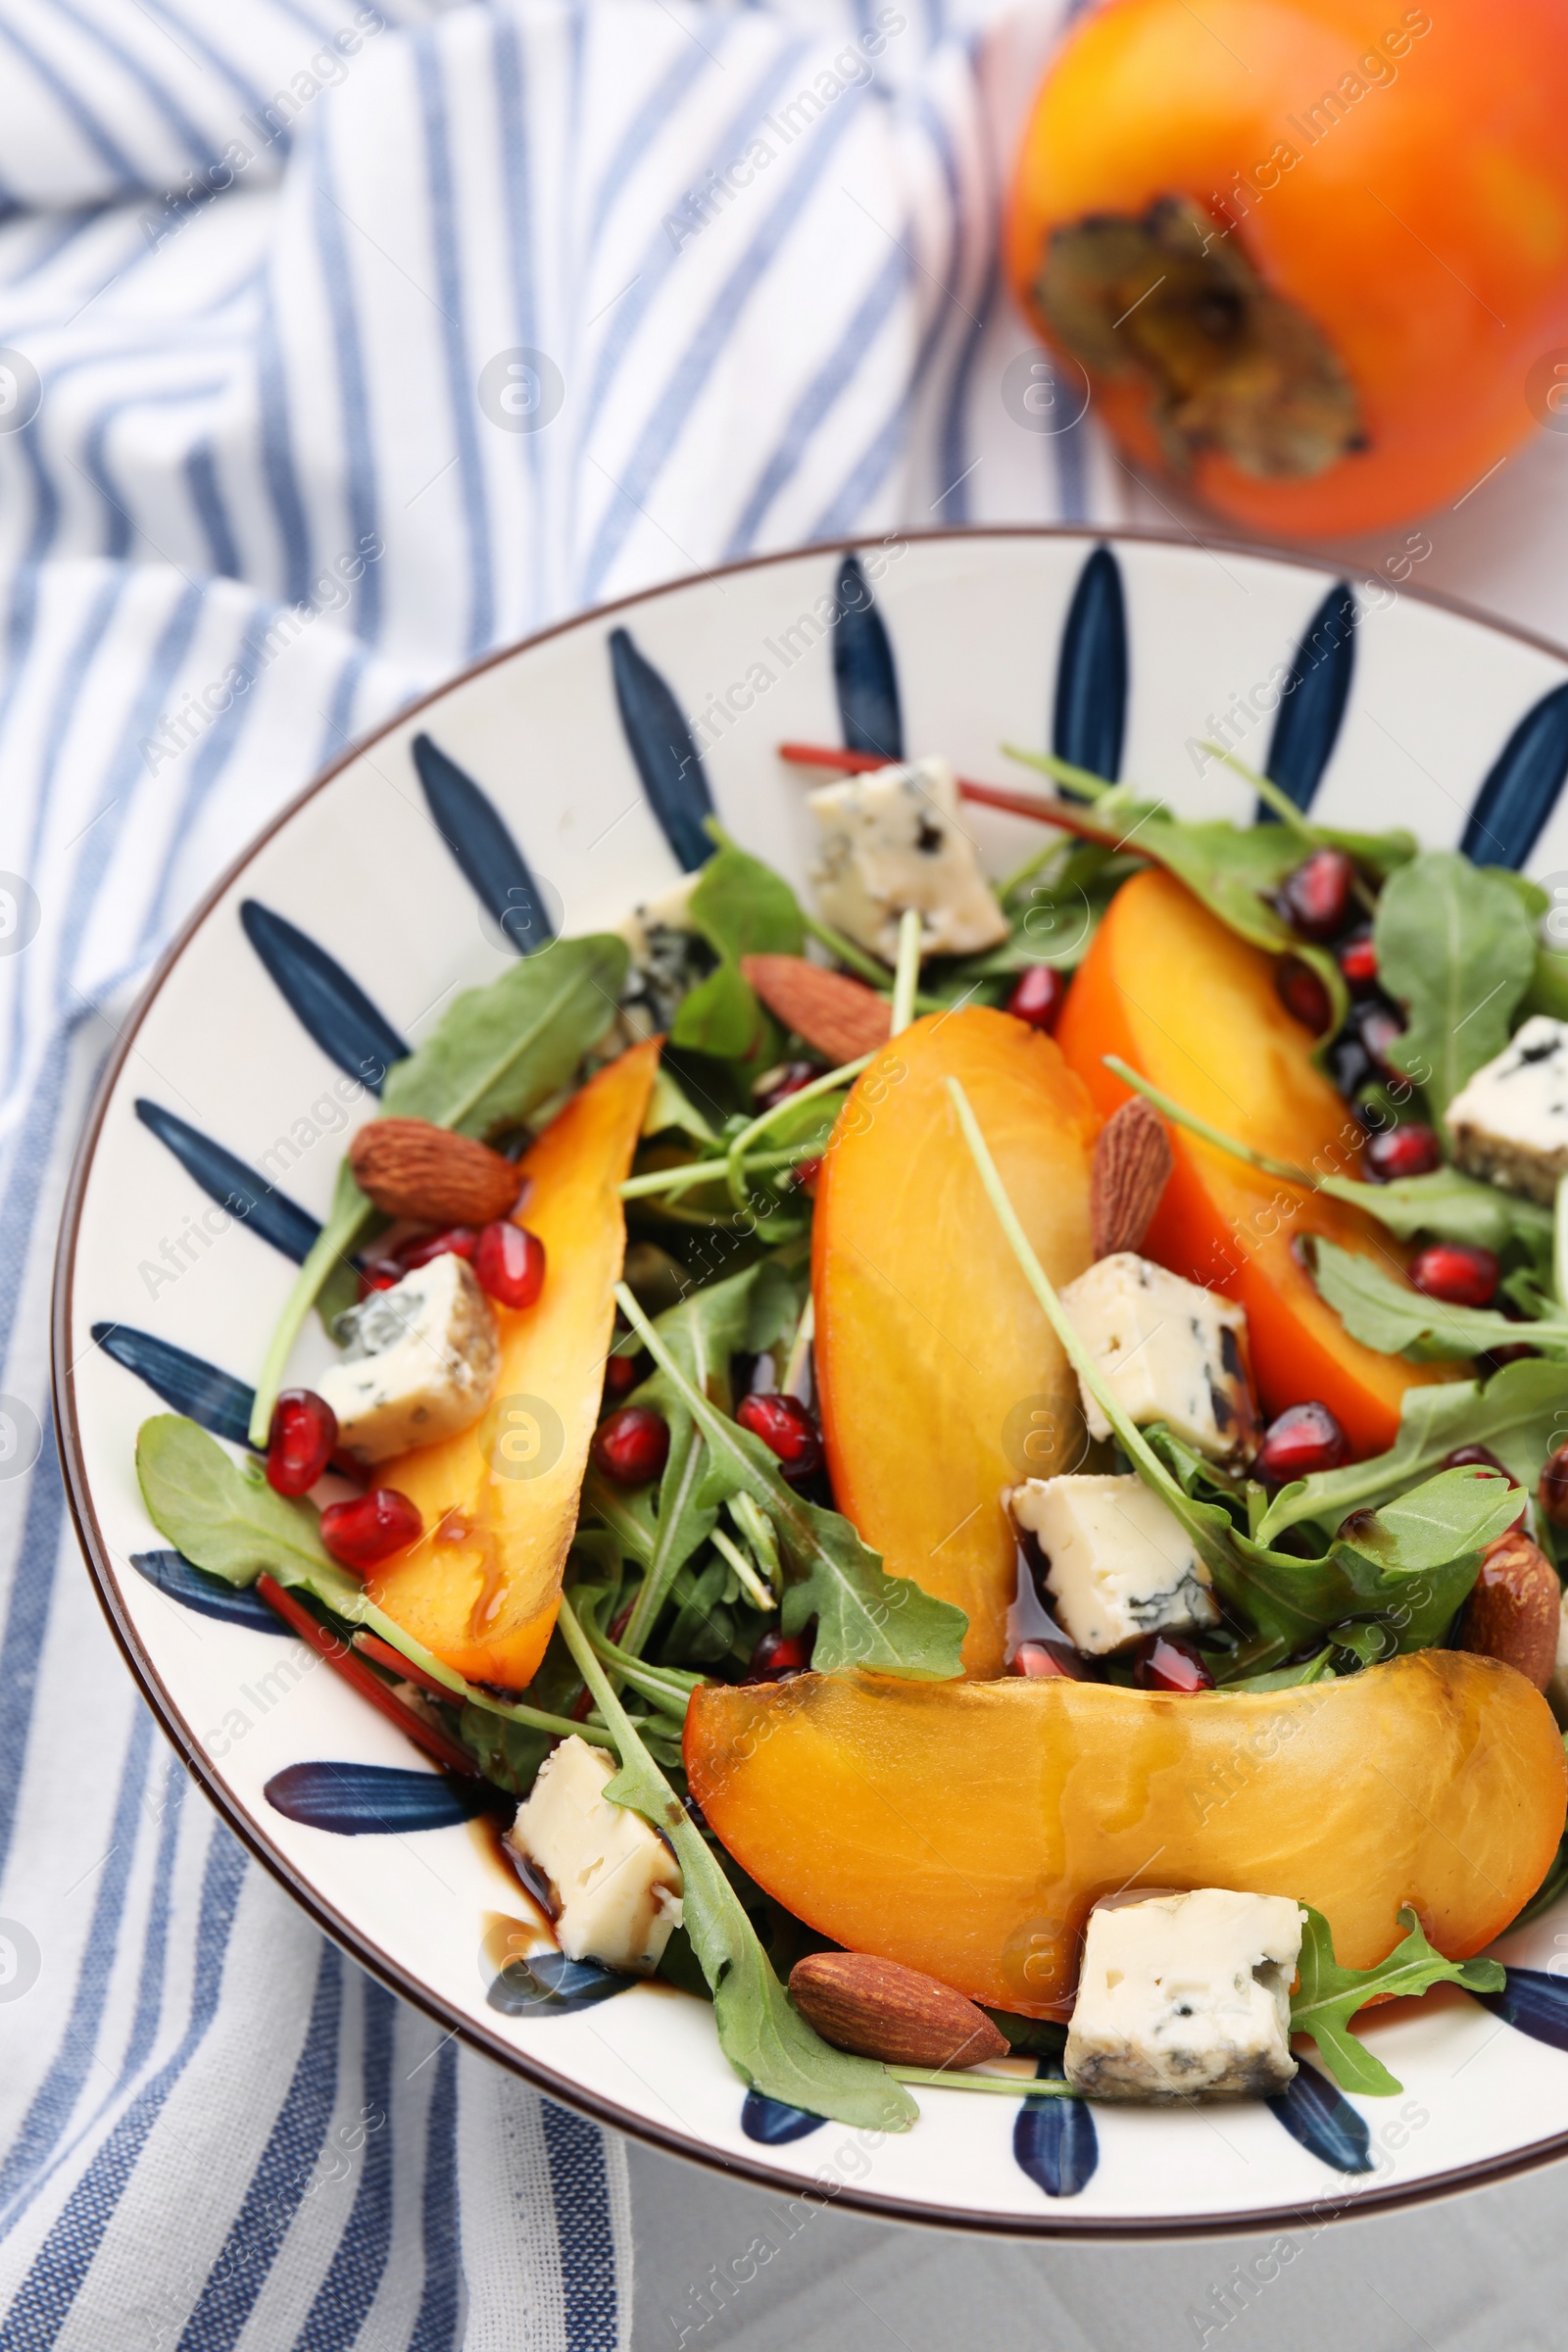 Photo of Tasty salad with persimmon, blue cheese, pomegranate and almonds served on white tiled table, closeup